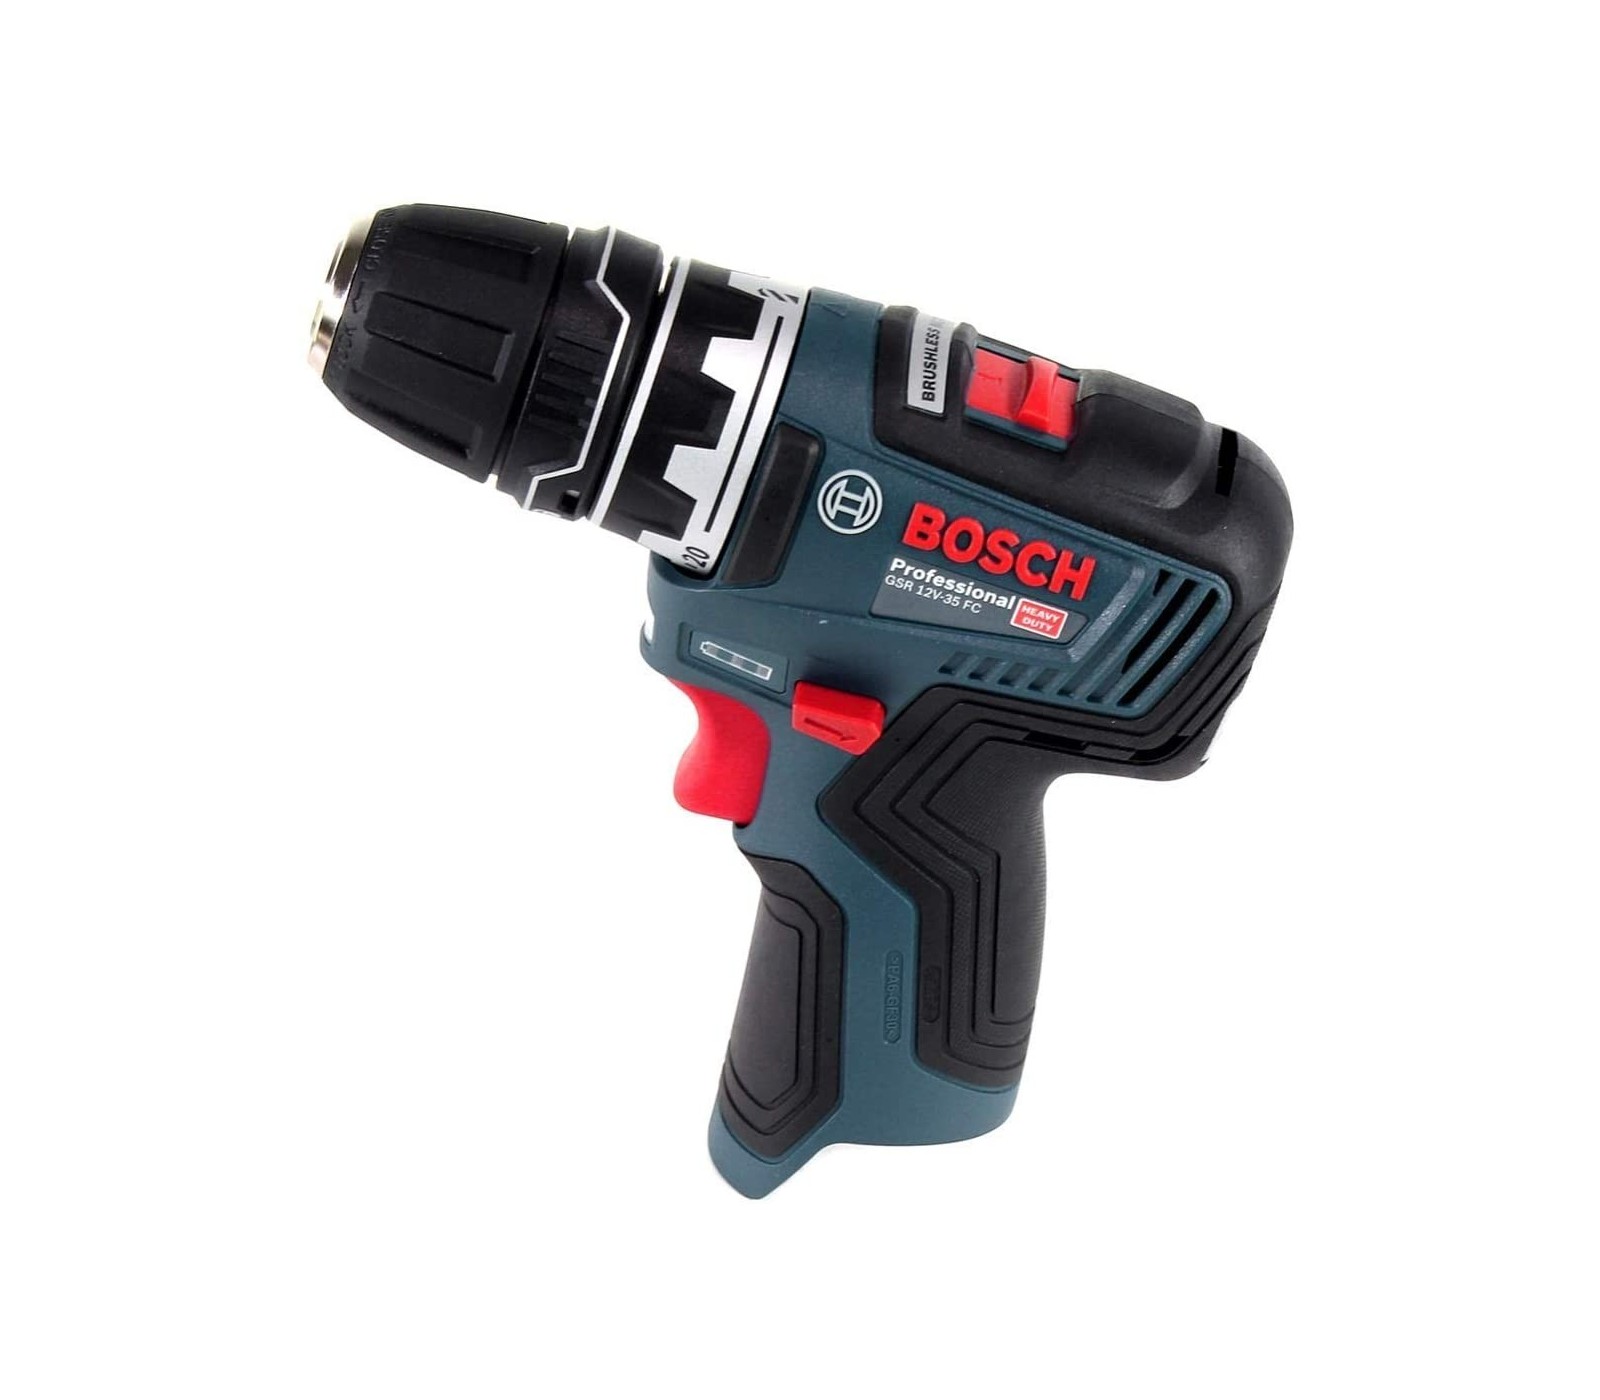 BOSCH 06019H3000 GSR 12V-35 FC - 12V Cordless drill driver in case with 2  3Ah batteries, charger, spindle and accessories, 0 - 460 / 0 - 1.750 rpm, Ø  screws max. 8 mm